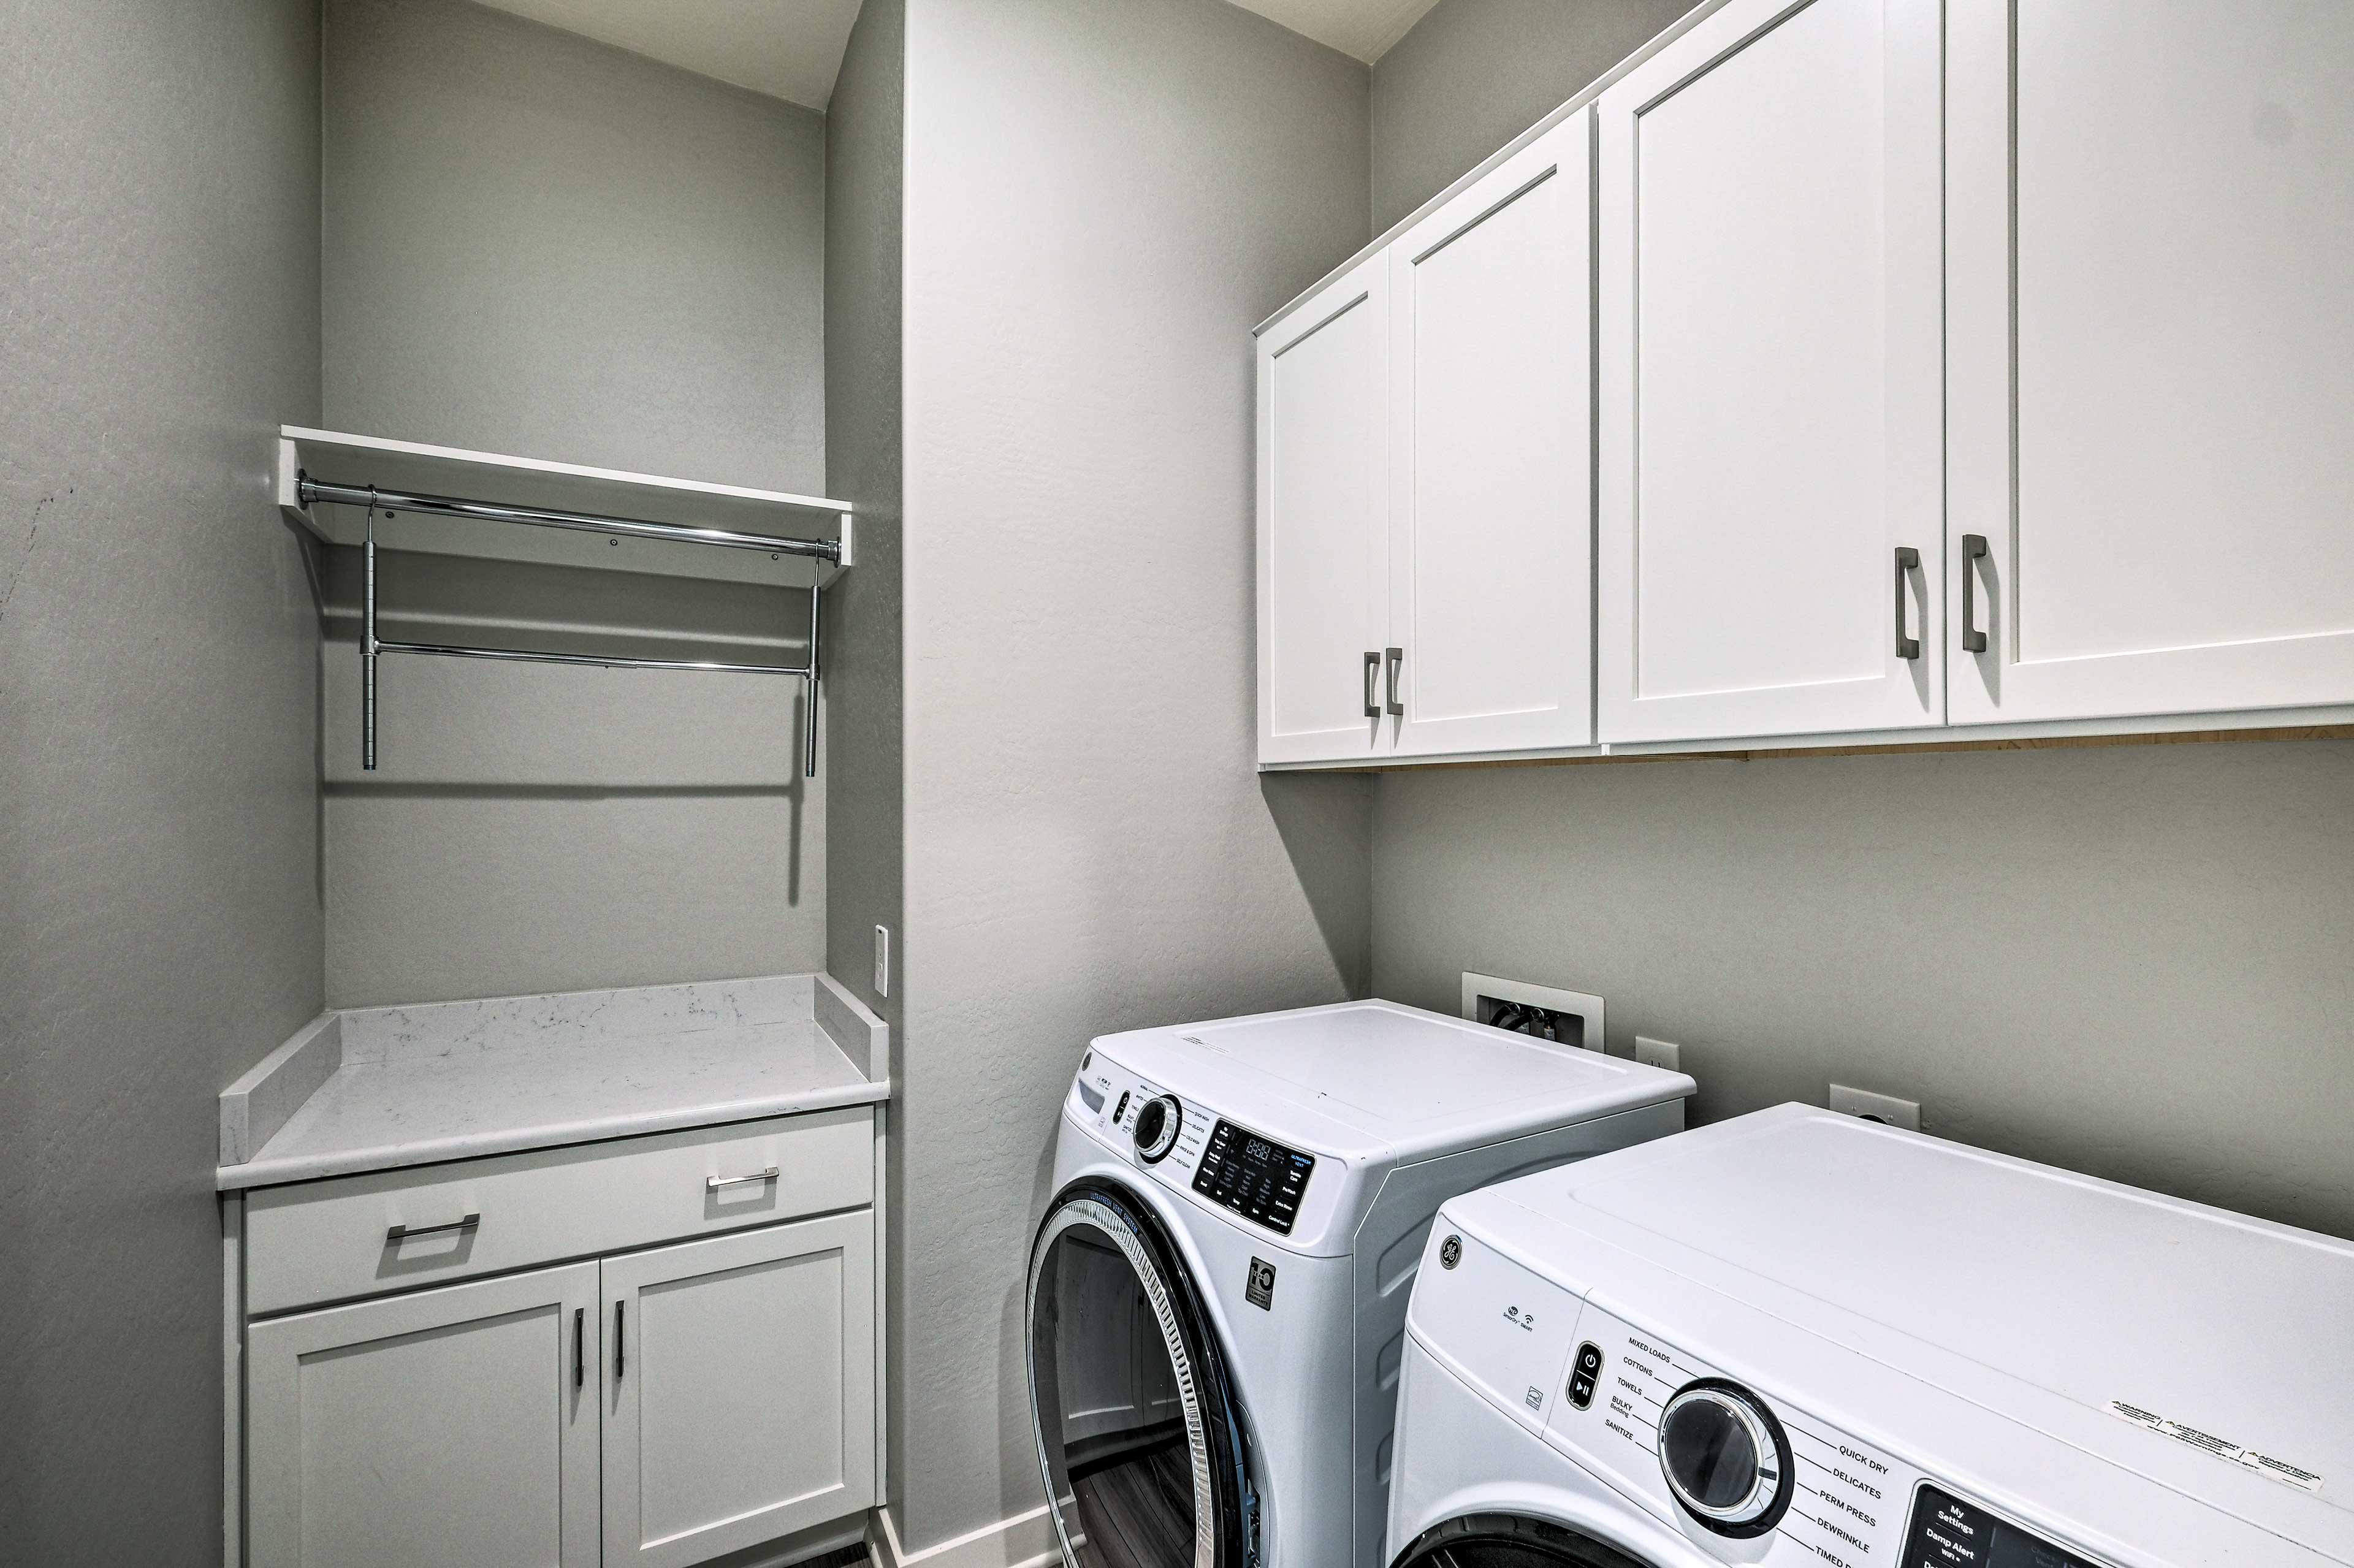 Laundry Room | Washer/Dryer | Iron/Board